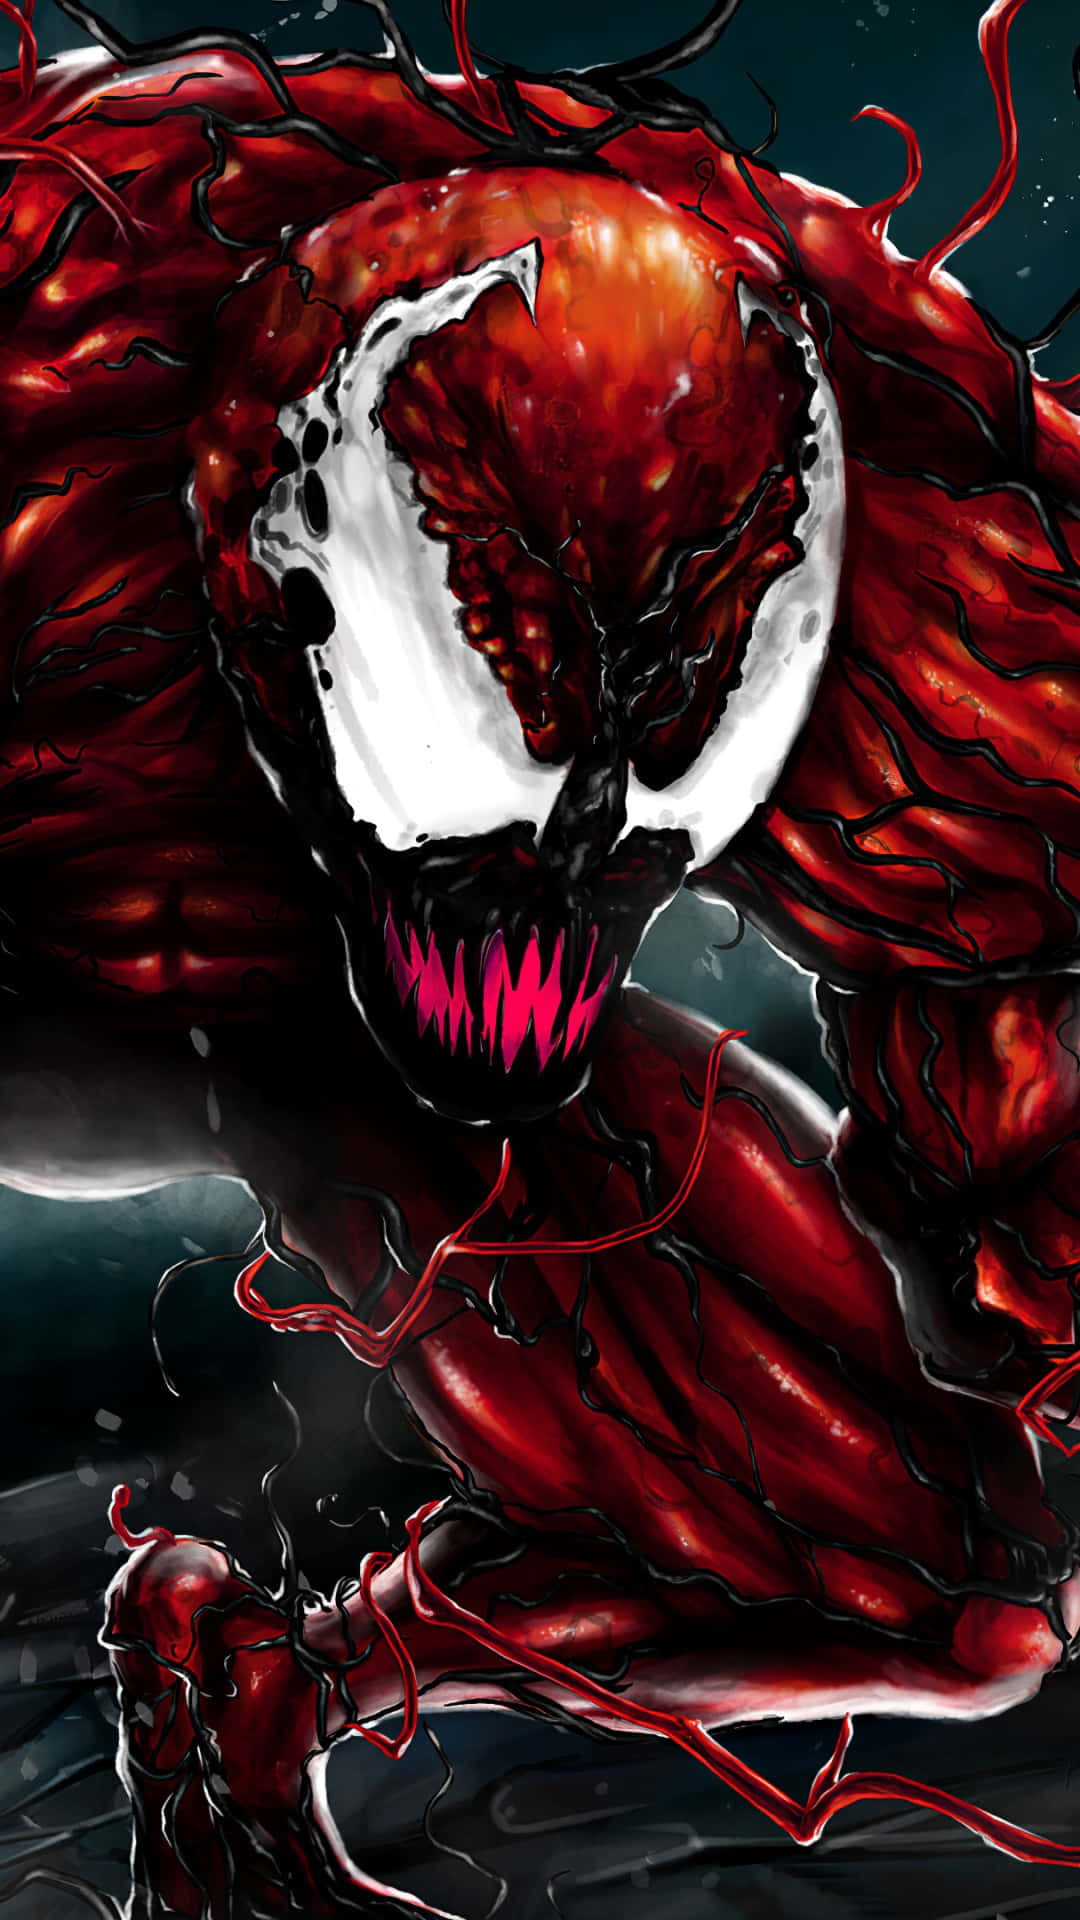 Maximum Carnage - Spider-Man and Venom against a horde of villains Wallpaper